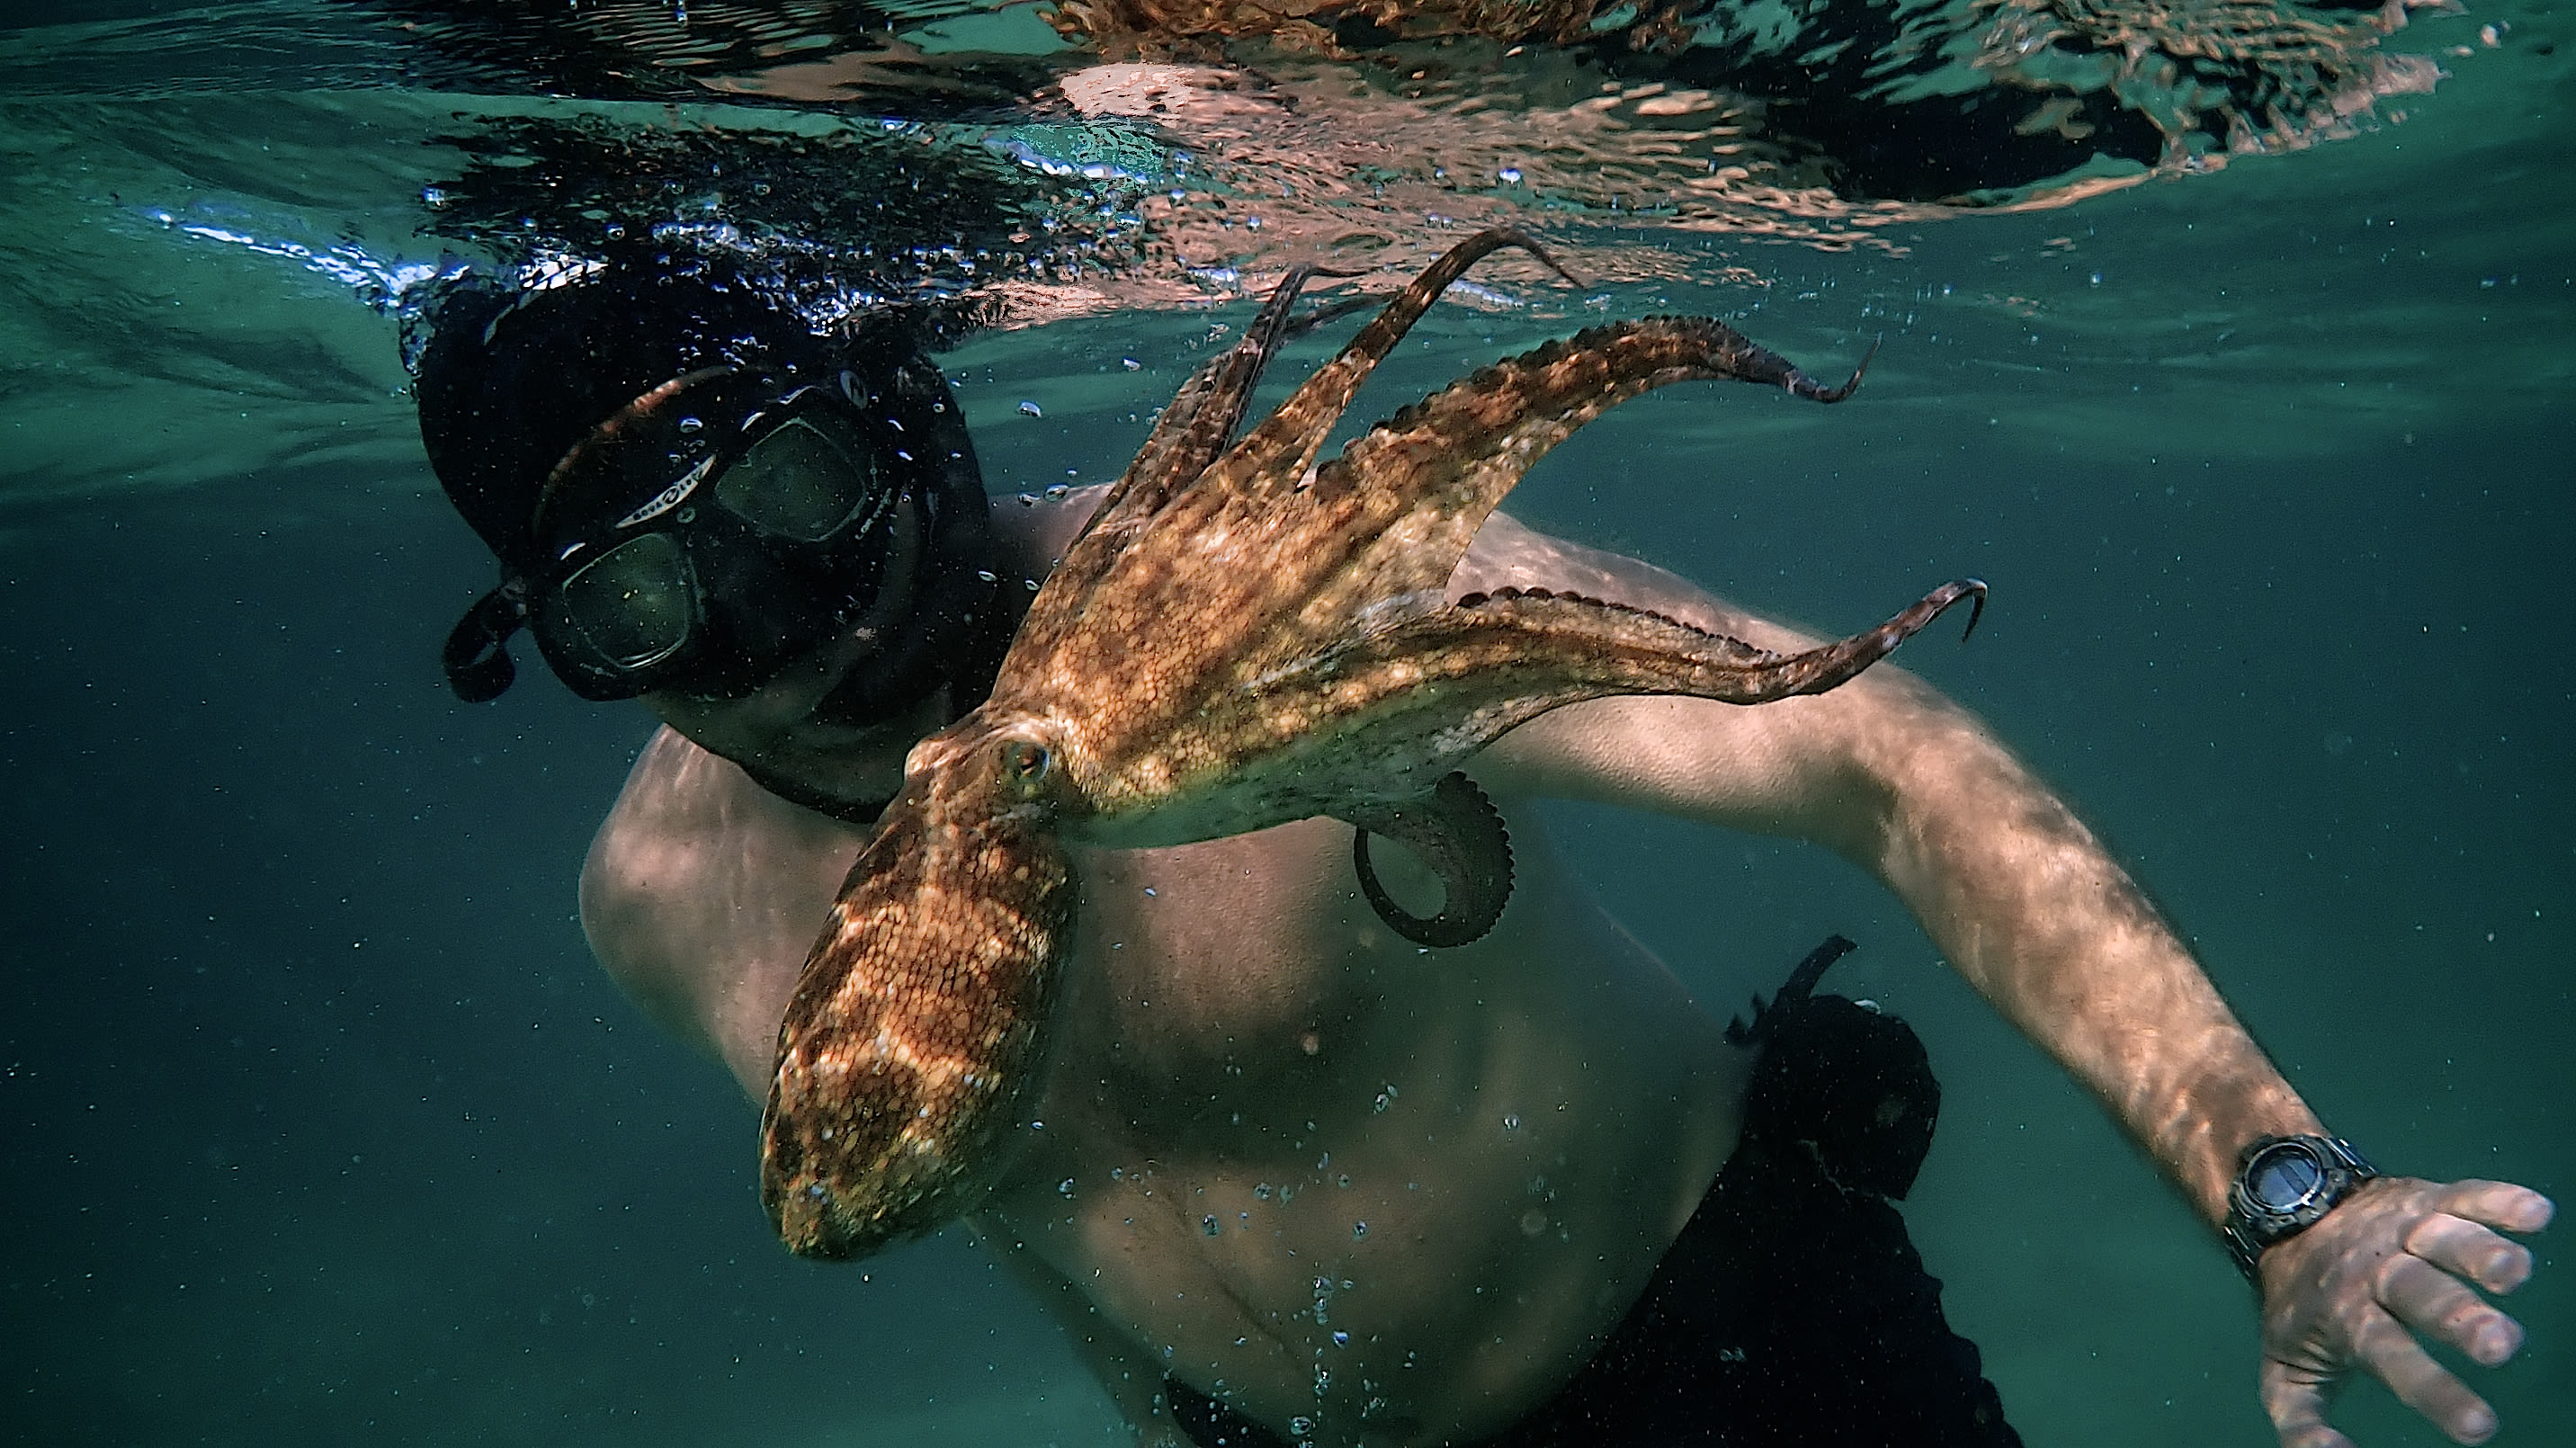 Craig Foster swimming with the octopus